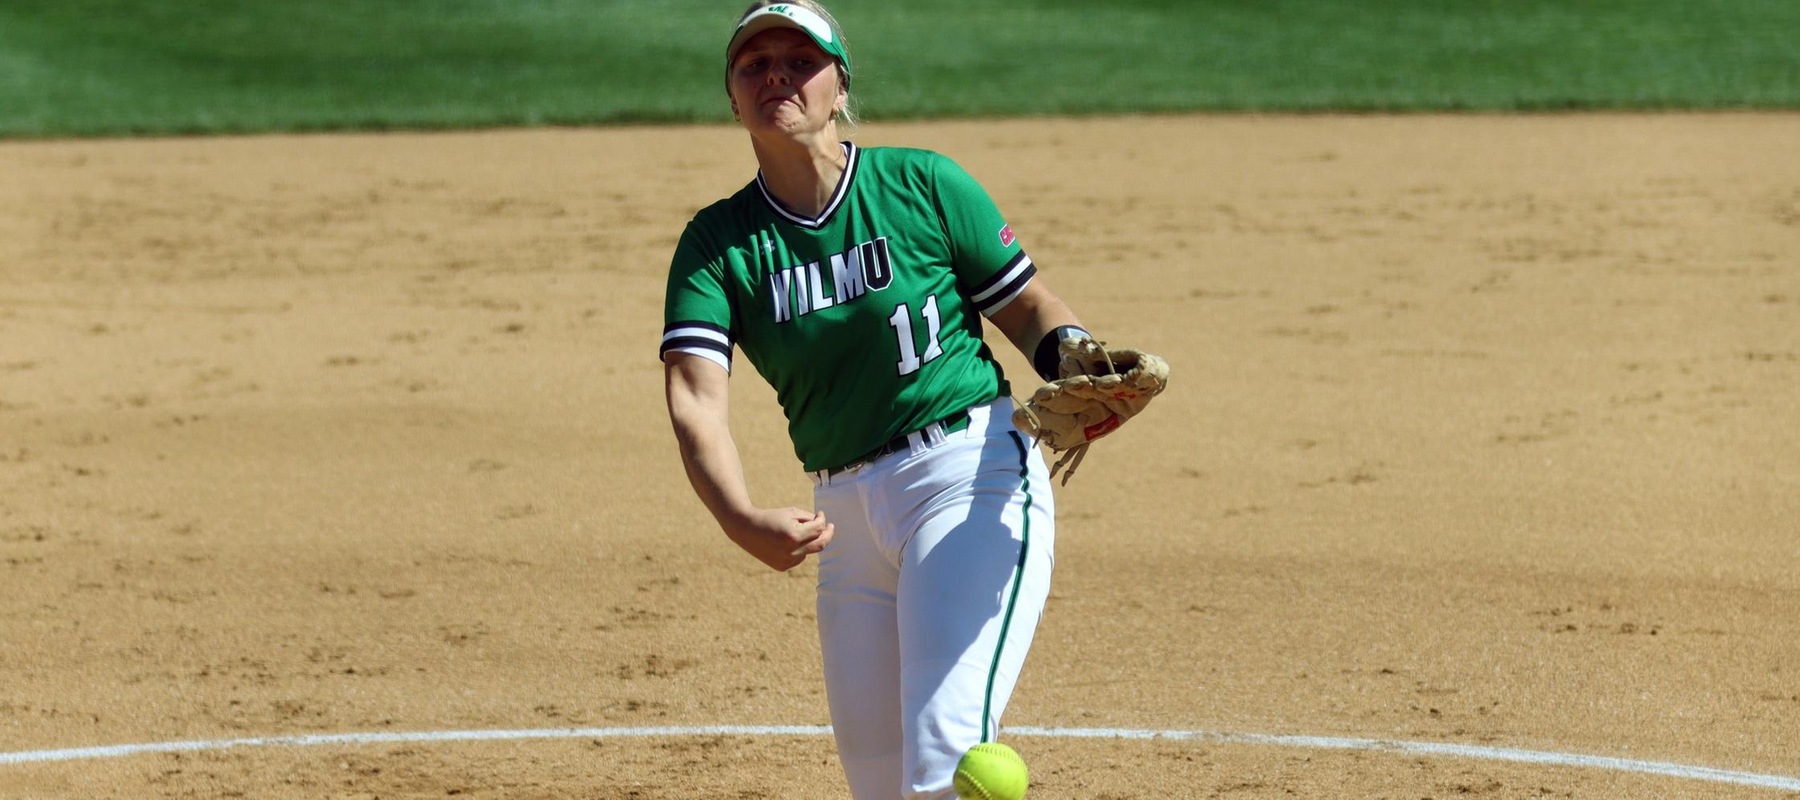 File photo of Kylee Gunkel who improved to 13-10 with a complete game shutout in game one at Nyack. Copyright 2022; Wilmington University. All rights reserved. Photo by Dan Lauletta. April 15, 2022 vs. Post.